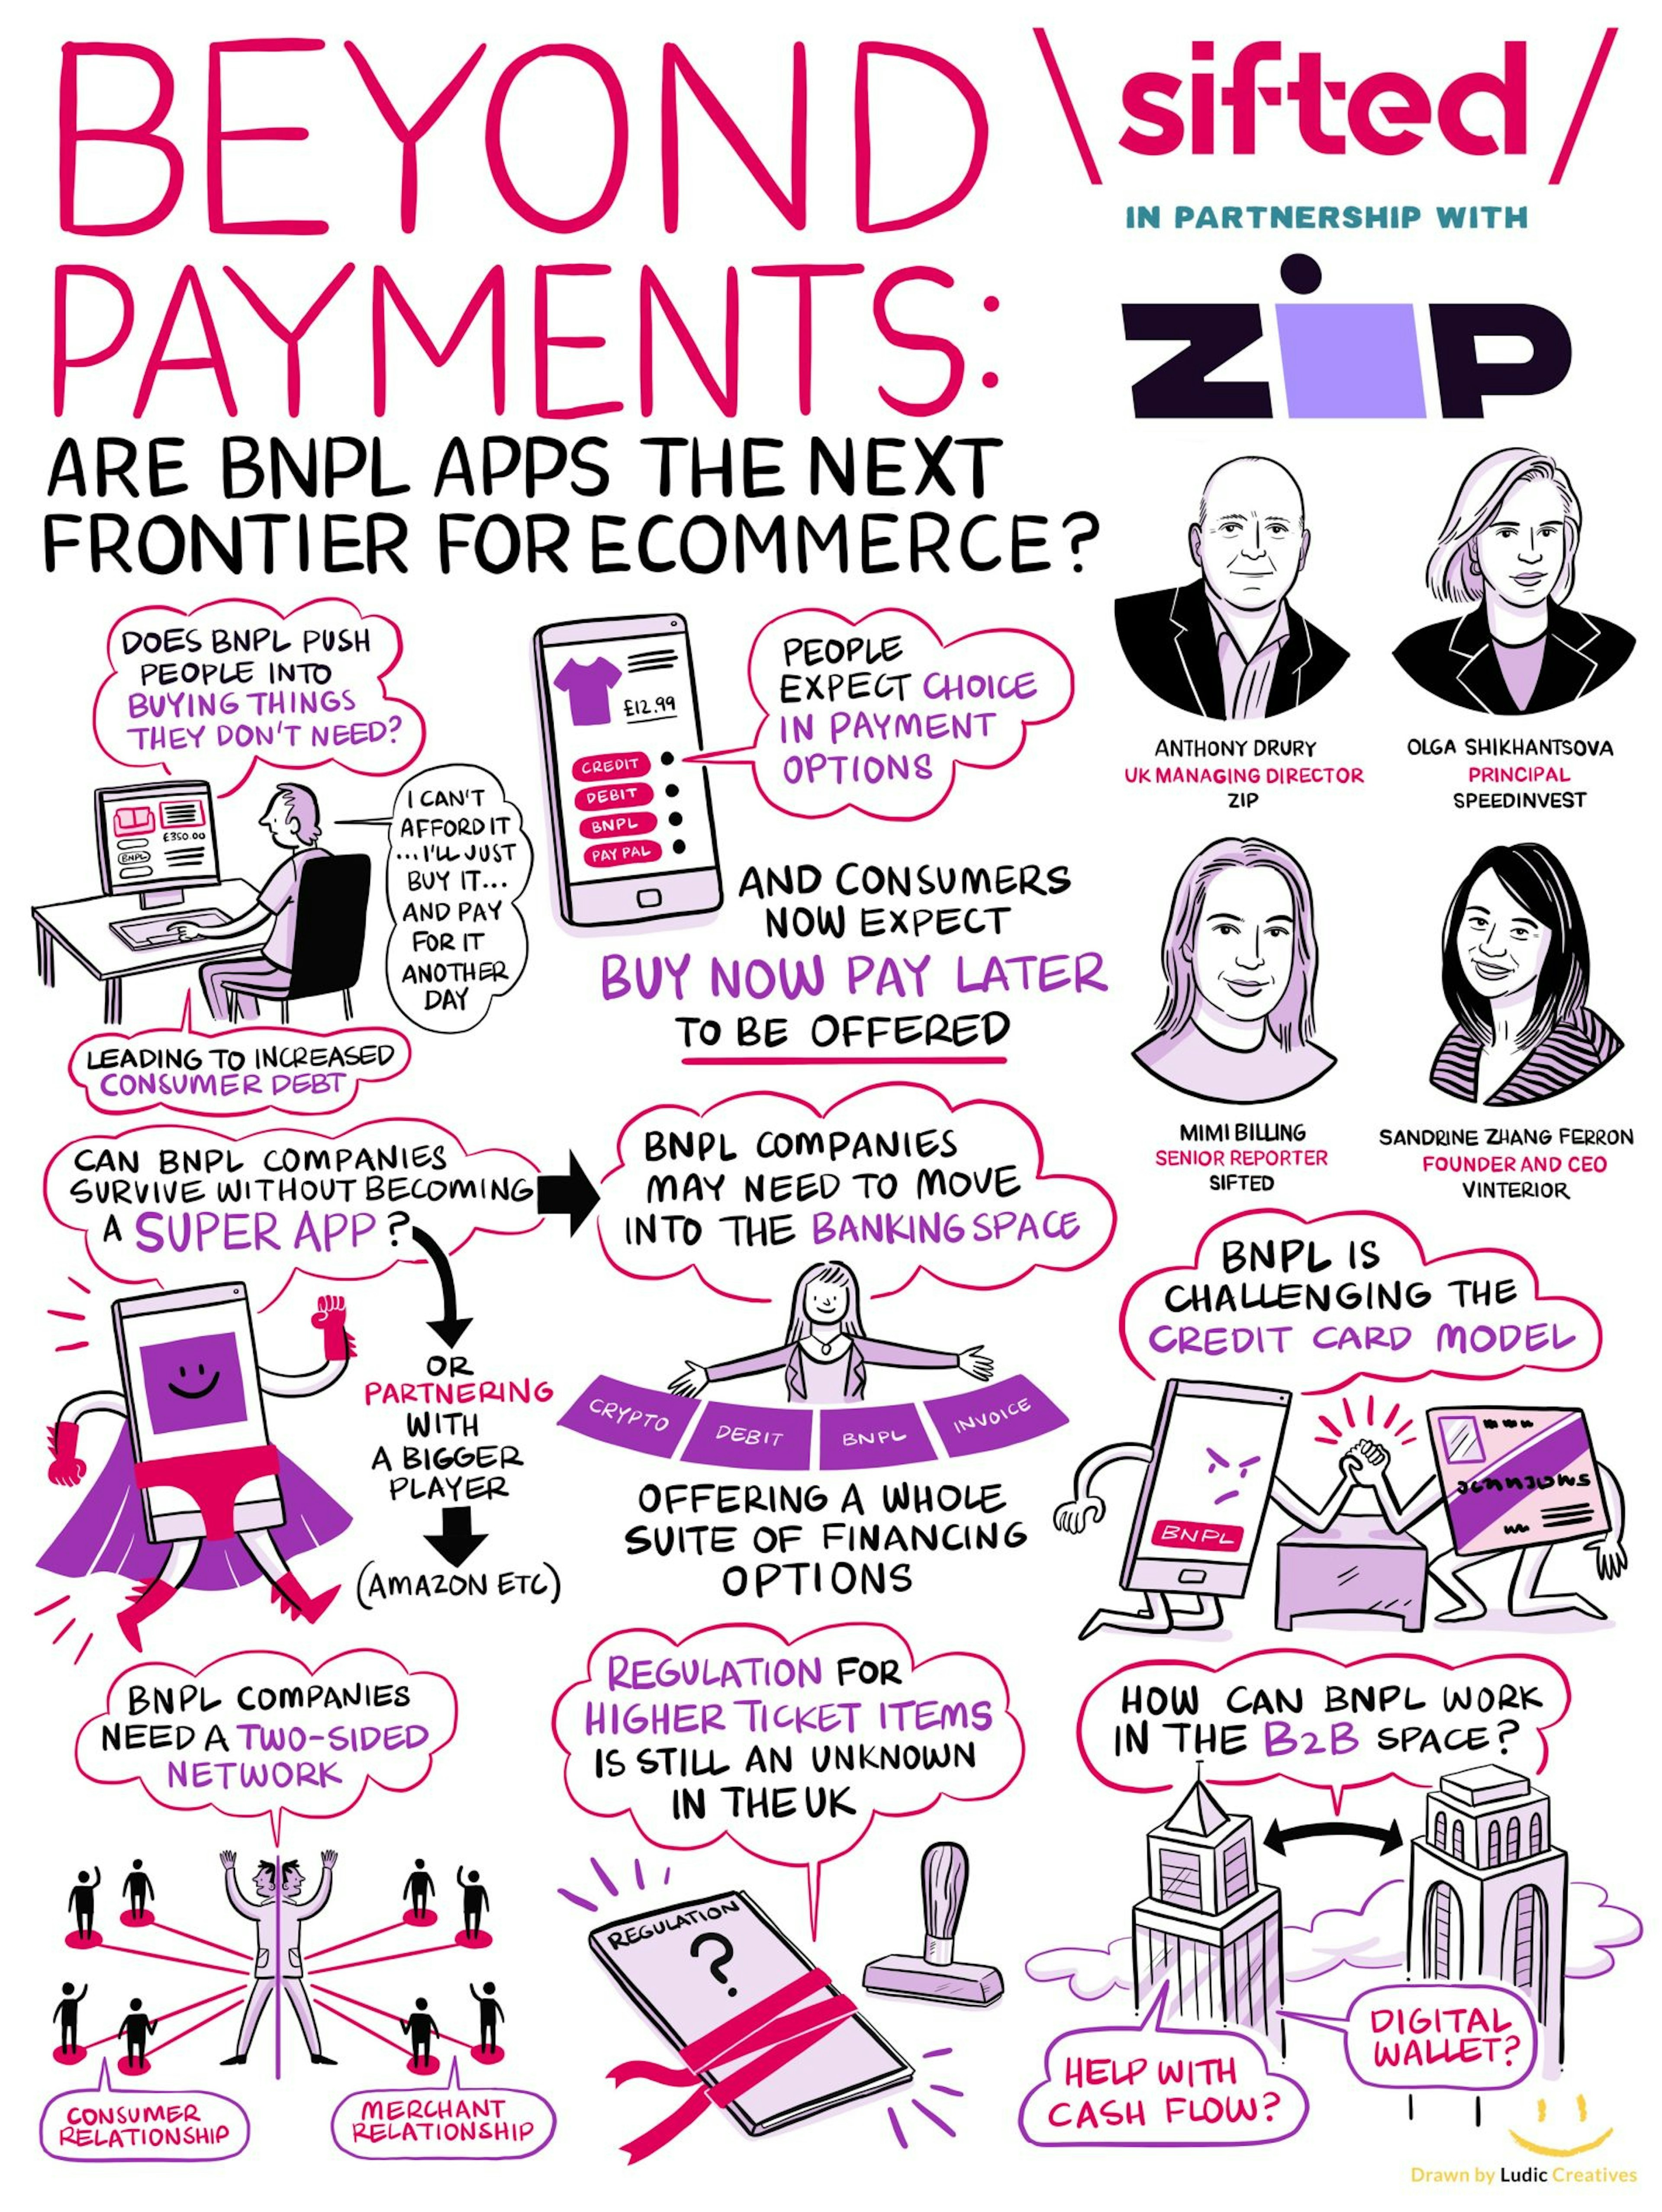 Buy now, pay later' firm Zip is confident about its future overseas